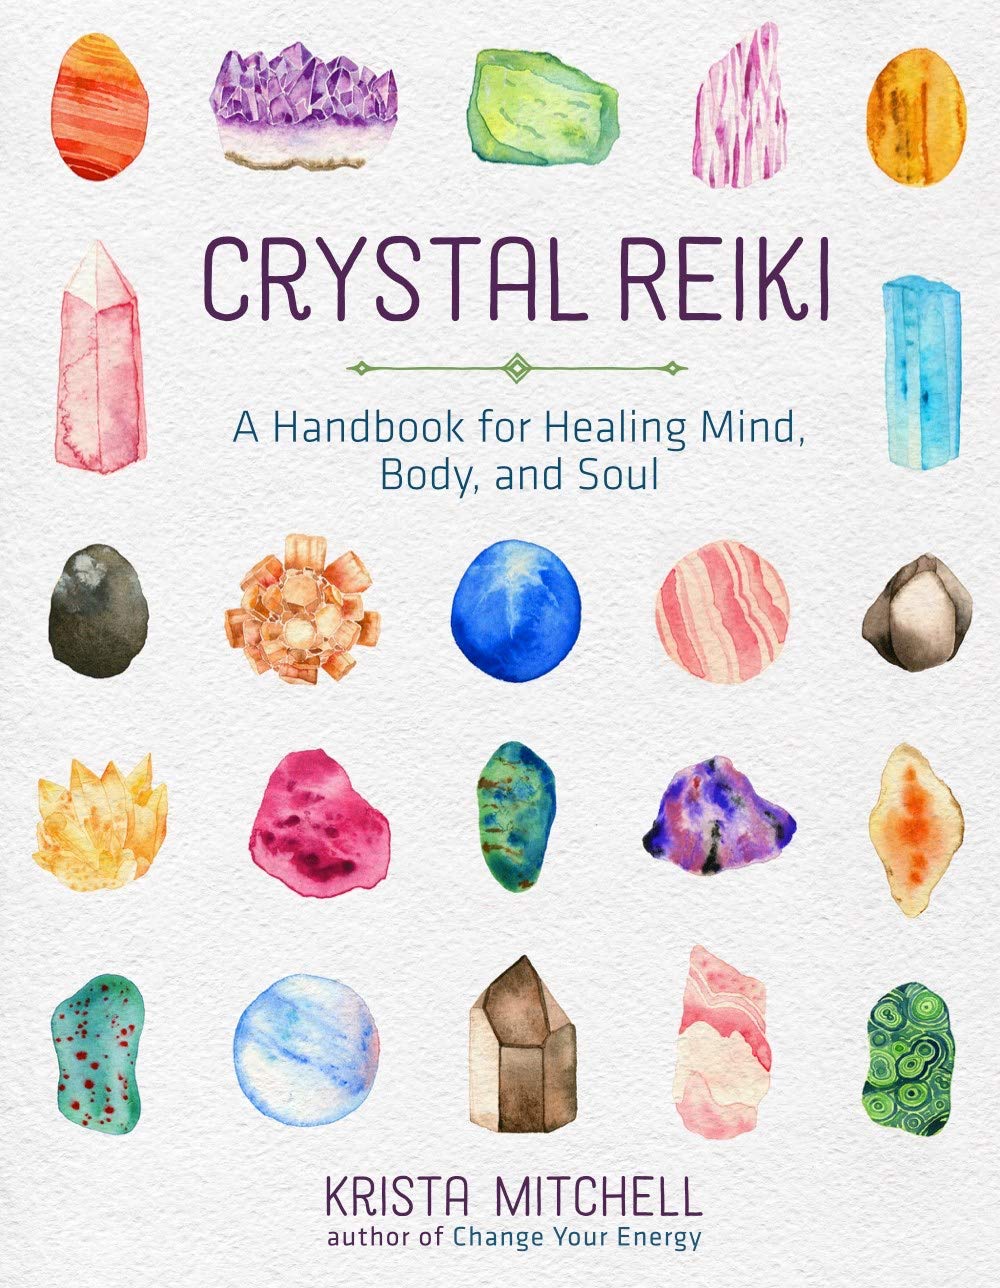 Crystal Reiki: A Handbook for Healing Mind, Body, and Soul (Copy) (Copy)